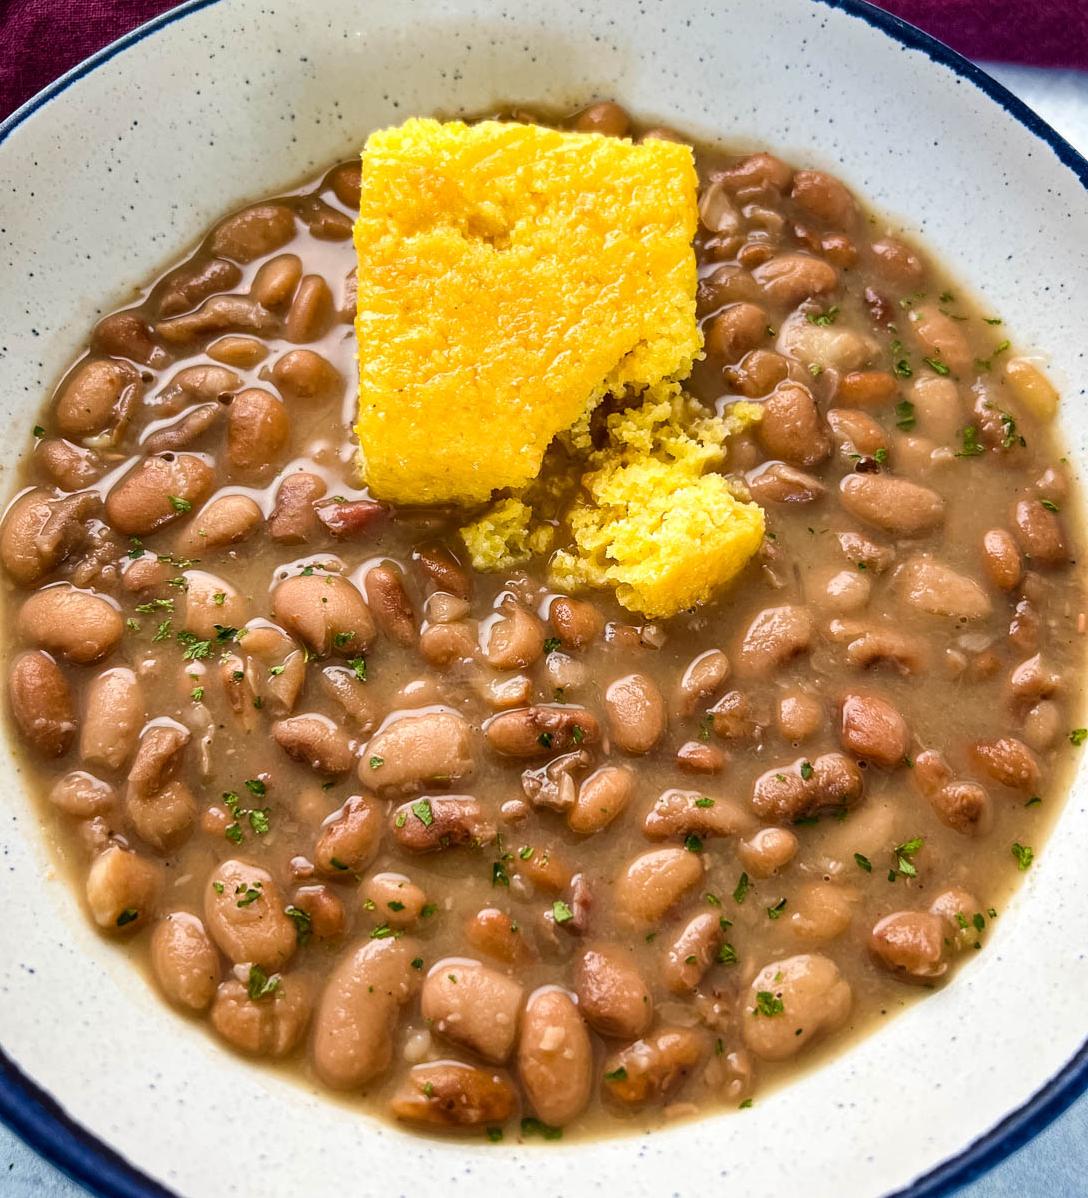  Delicious South-inspired goodness, it’s all in the bowl of these Southern Beans!